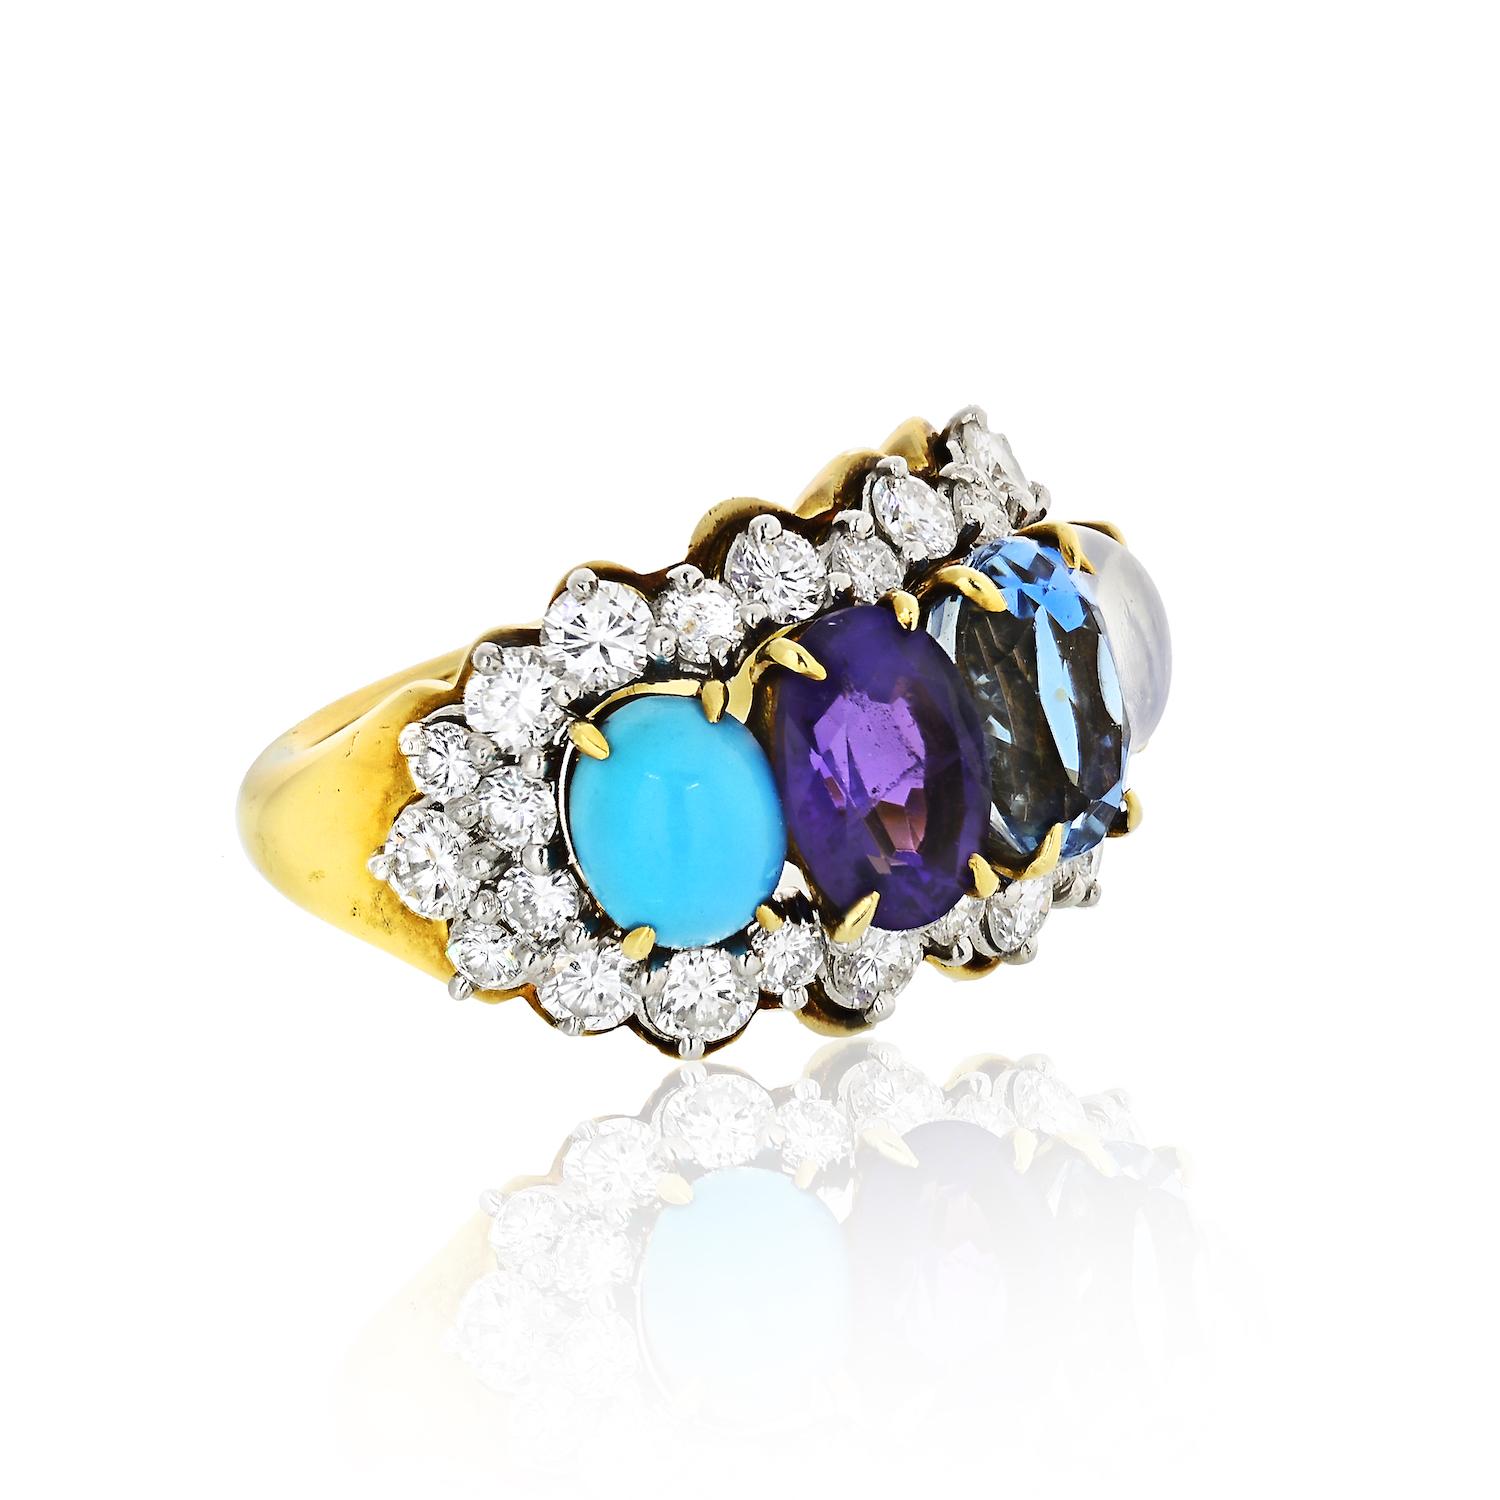 Tiffany Circa 1950 Four Stone Gemstone Diamond Ring Yellow Gold 3.00 cttw 

Gemstones that meet Tiffany's standards for clarity and color saturation rarely surface. When they do, their astonishing beauty defies description. Tiffany frames each stone